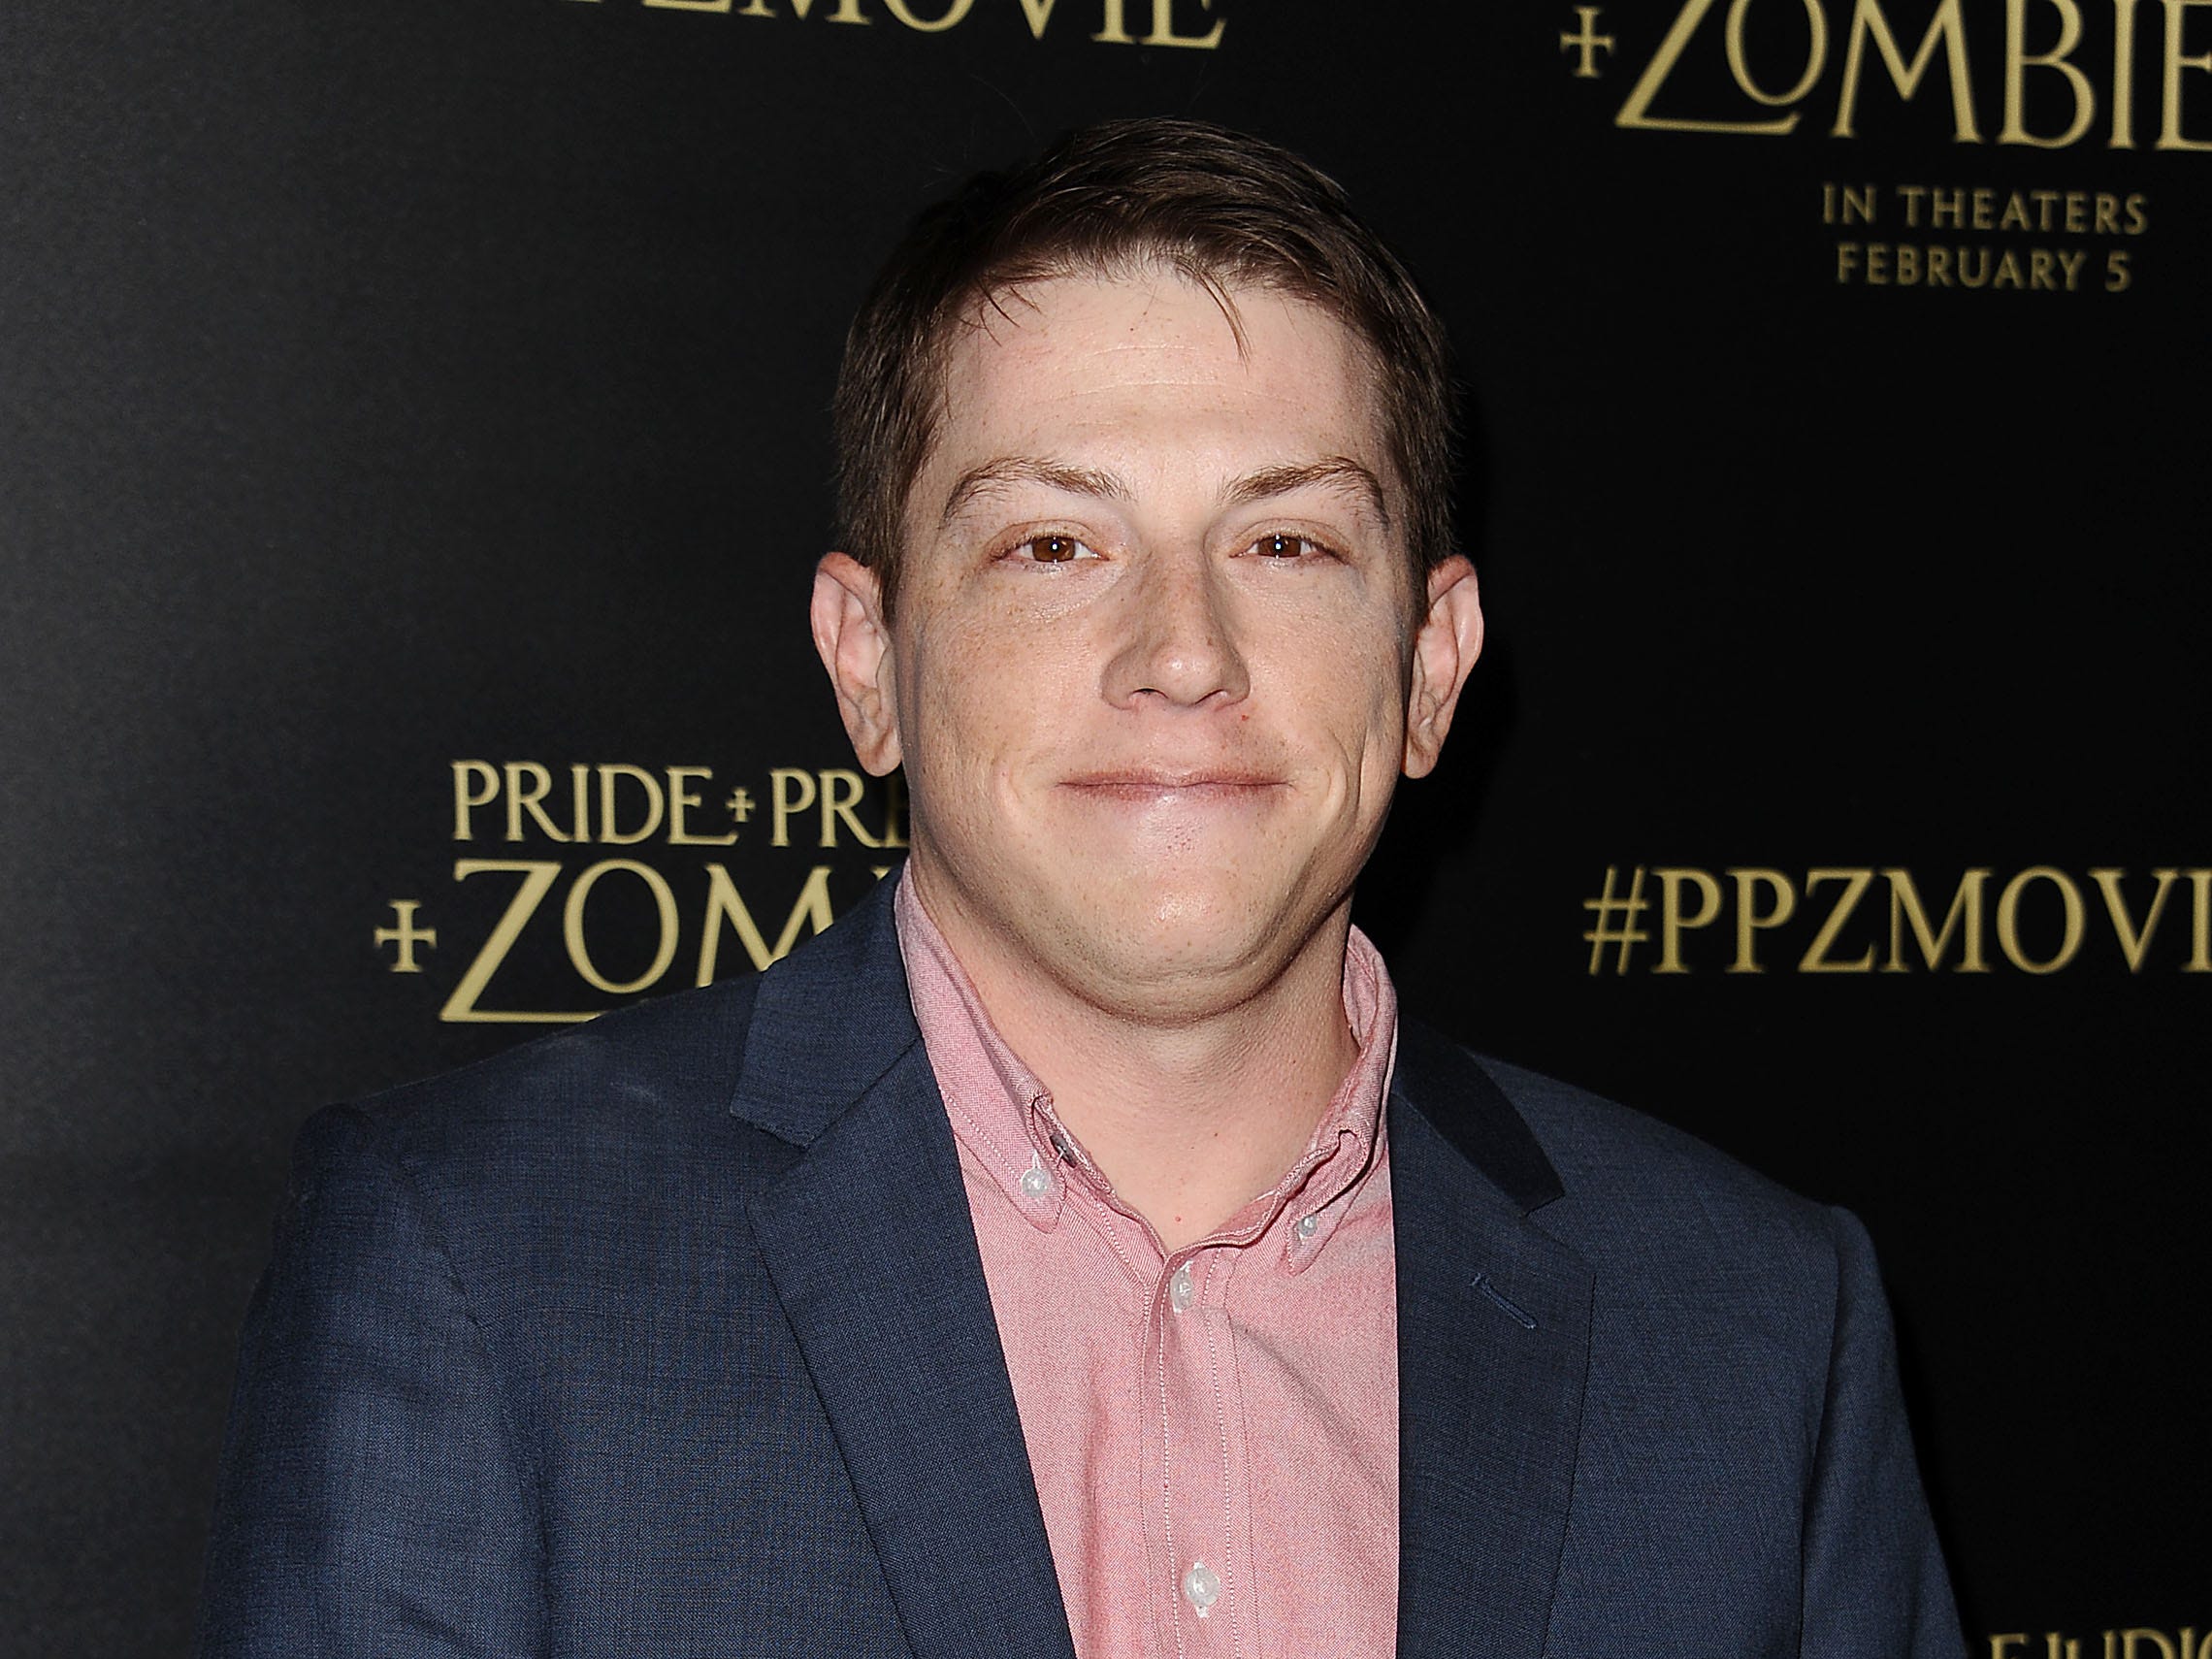 Seth Grahame-Smith nimmt am 21. Januar 2016 an der Premiere von „Pride and Prejudice and Zombies“ im Harmony Gold Theatre teil.